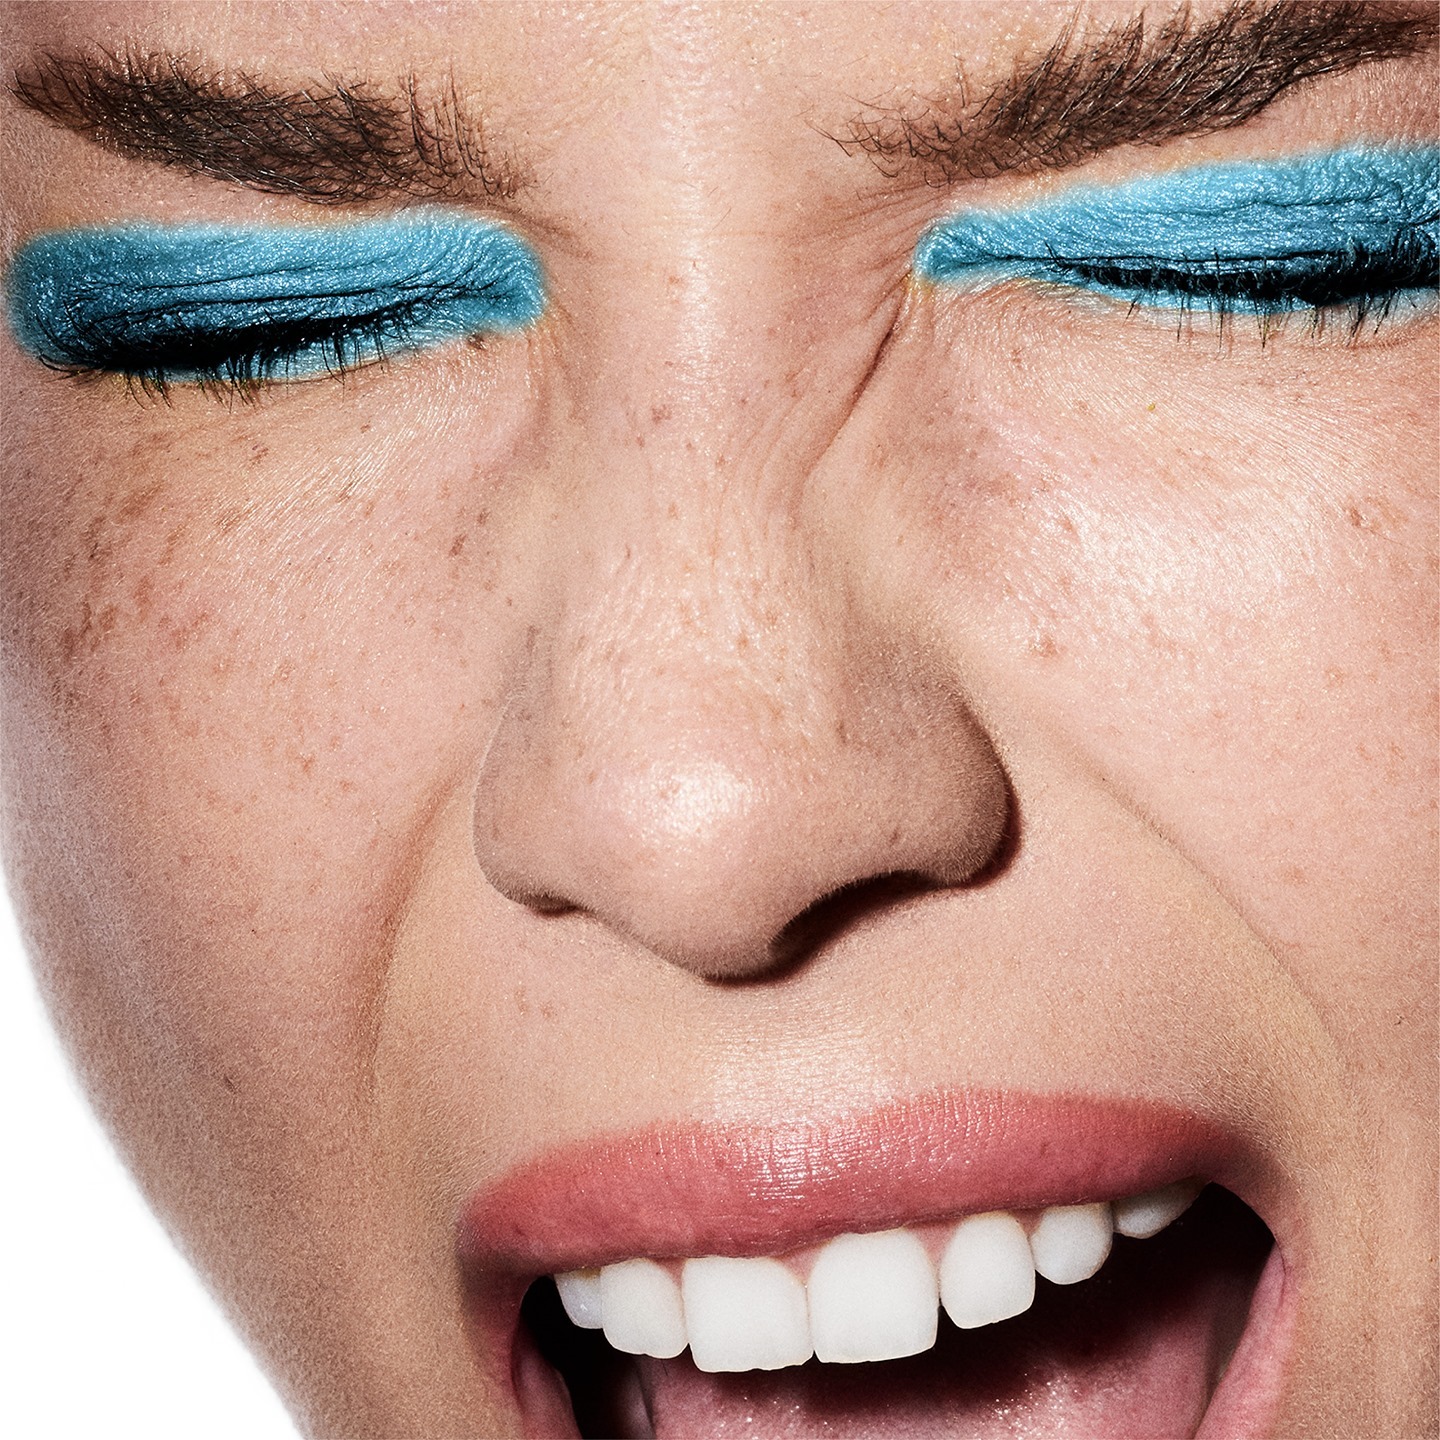 About Face Review: We Tried Halsey's New Makeup Line